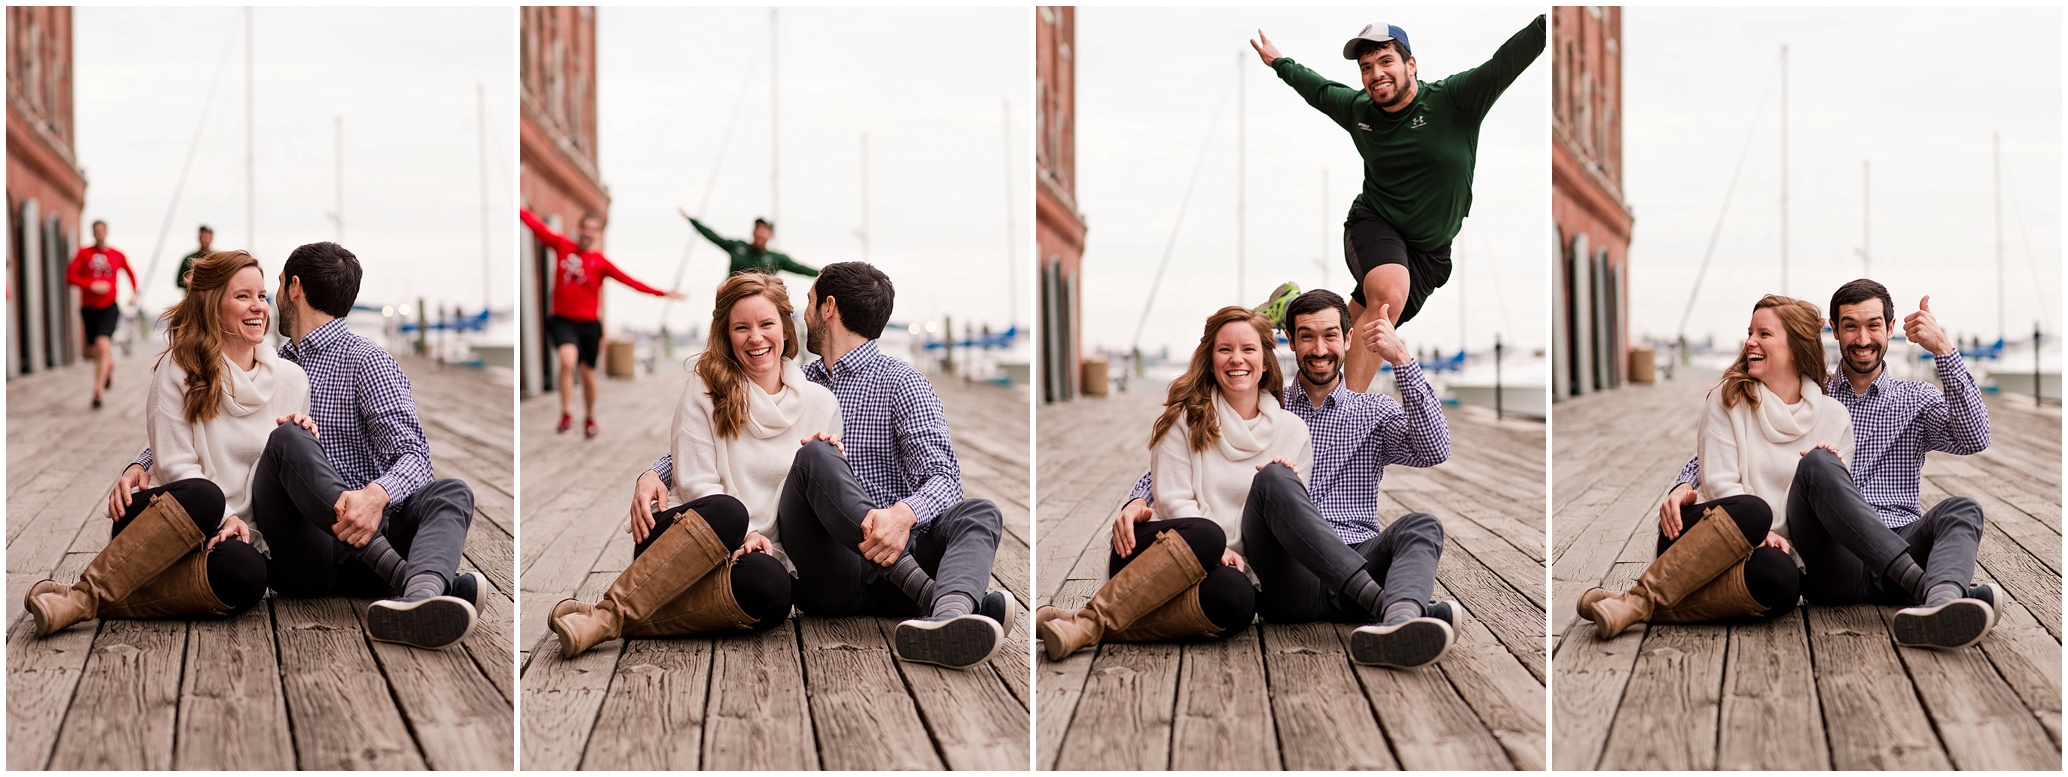 Hannah Leigh Photography Fell Point Baltimore MD Engagement Session_3540.jpg